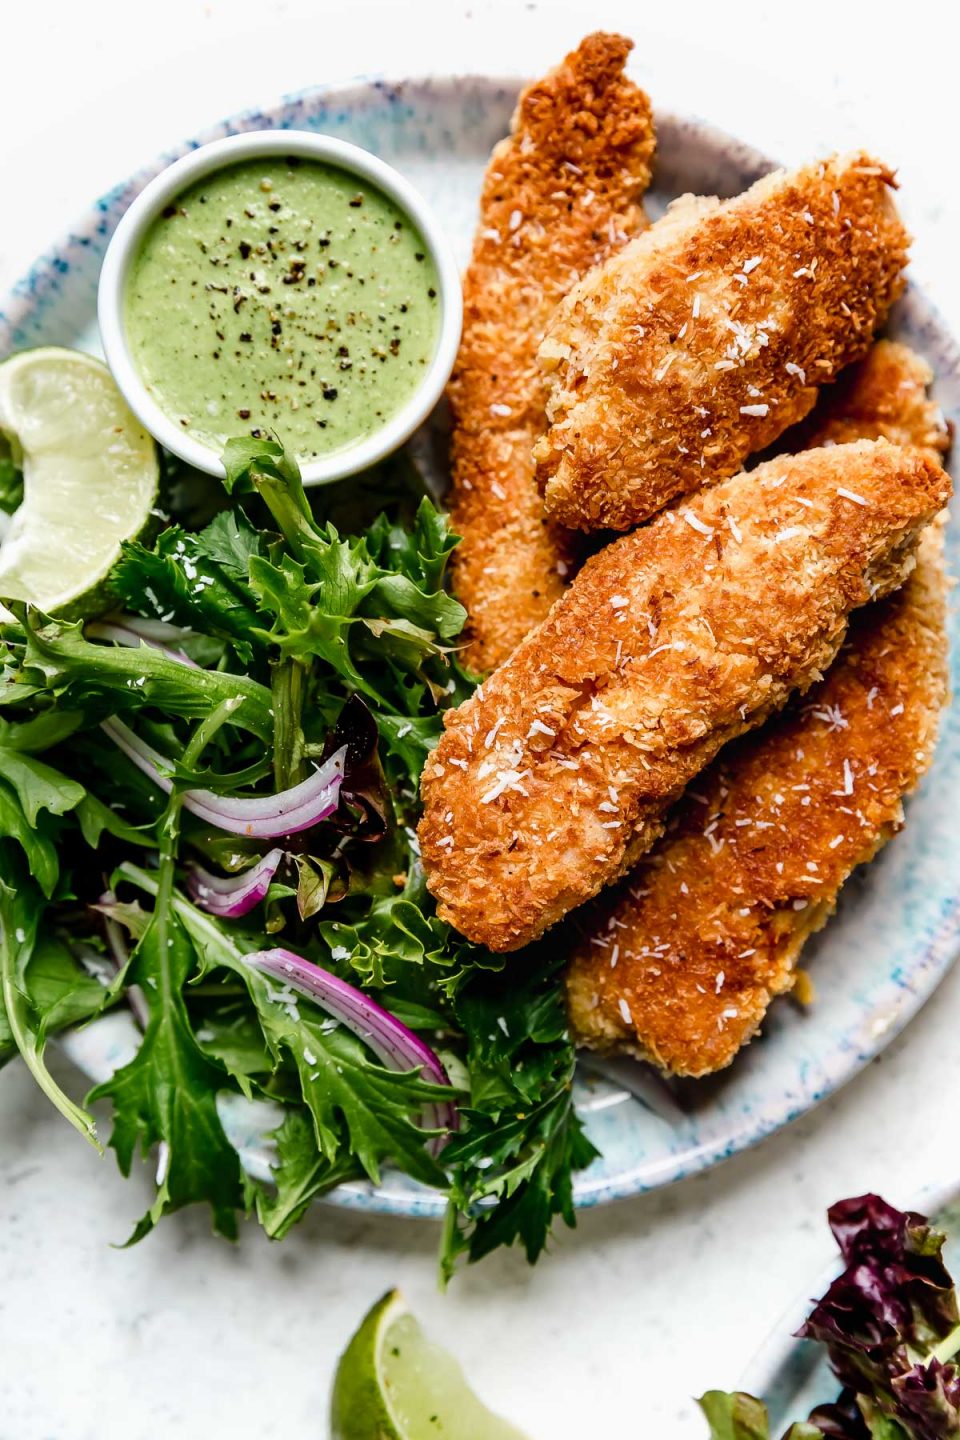 Crispy coconut chicken tenders on a blue-speckled plate with salad greens and cilantro-lime cashew crema for dipping.